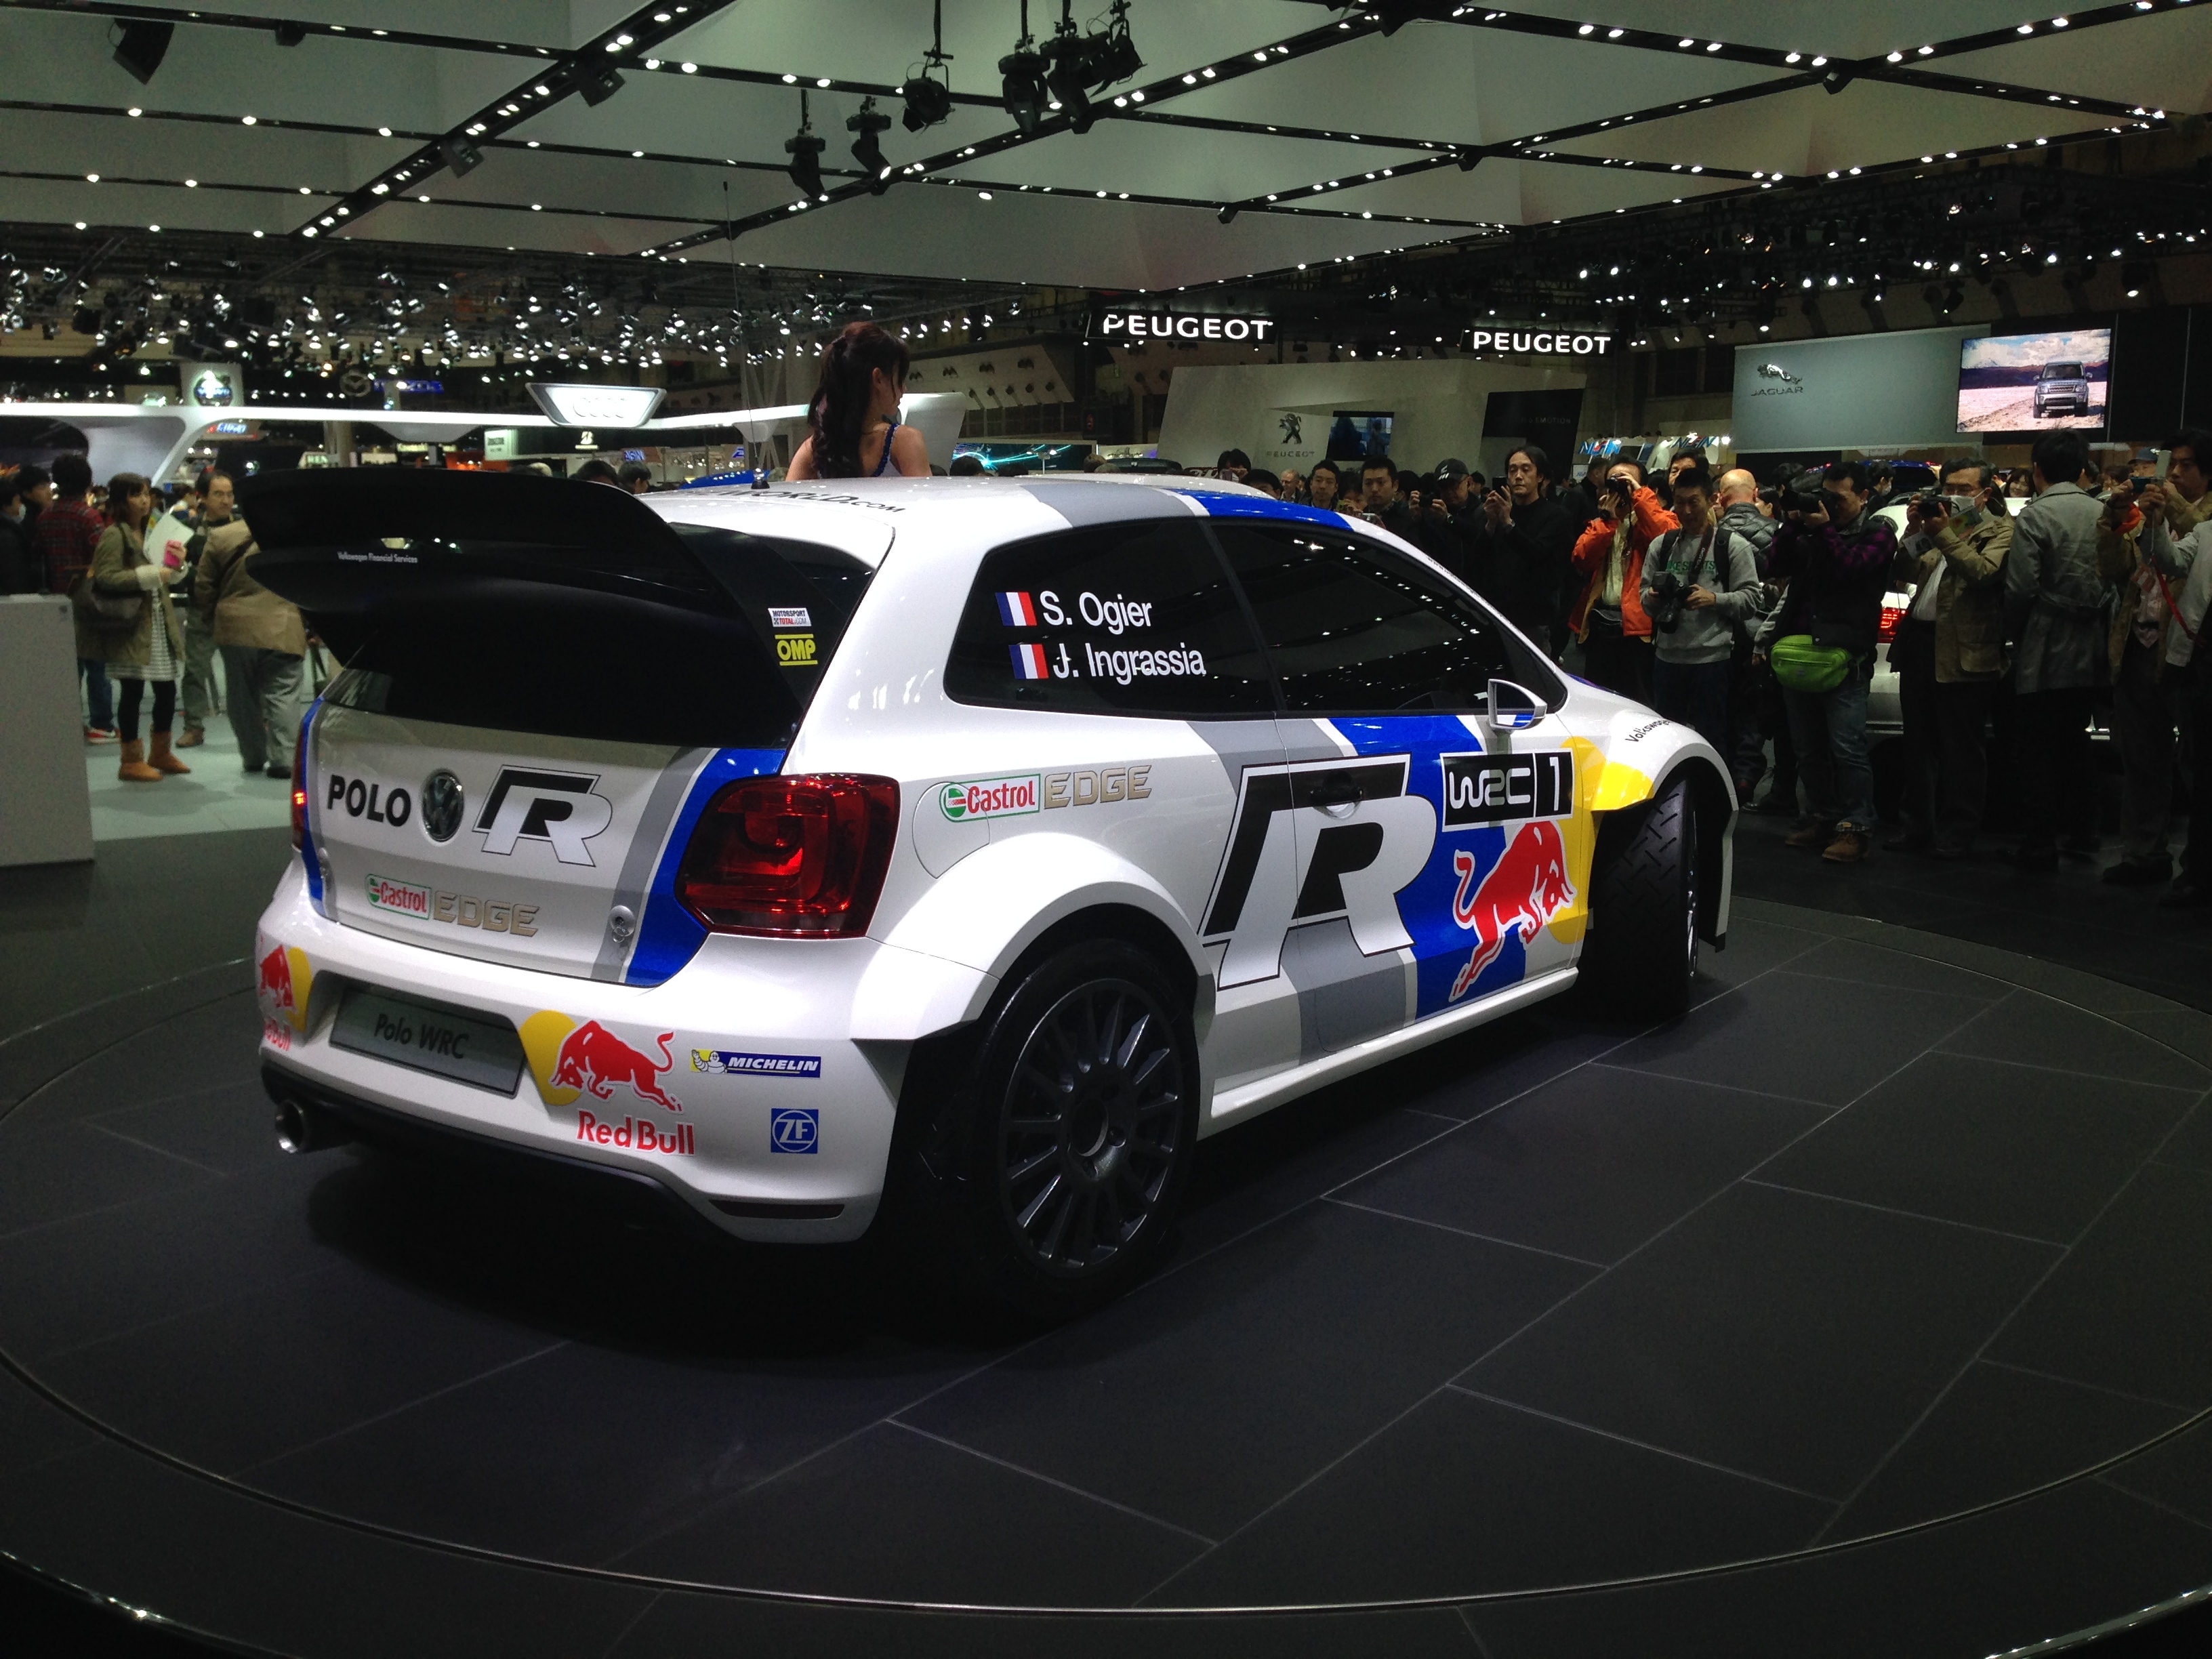 Amazing 2013 Volkswagen Polo Wrc Pictures & Backgrounds